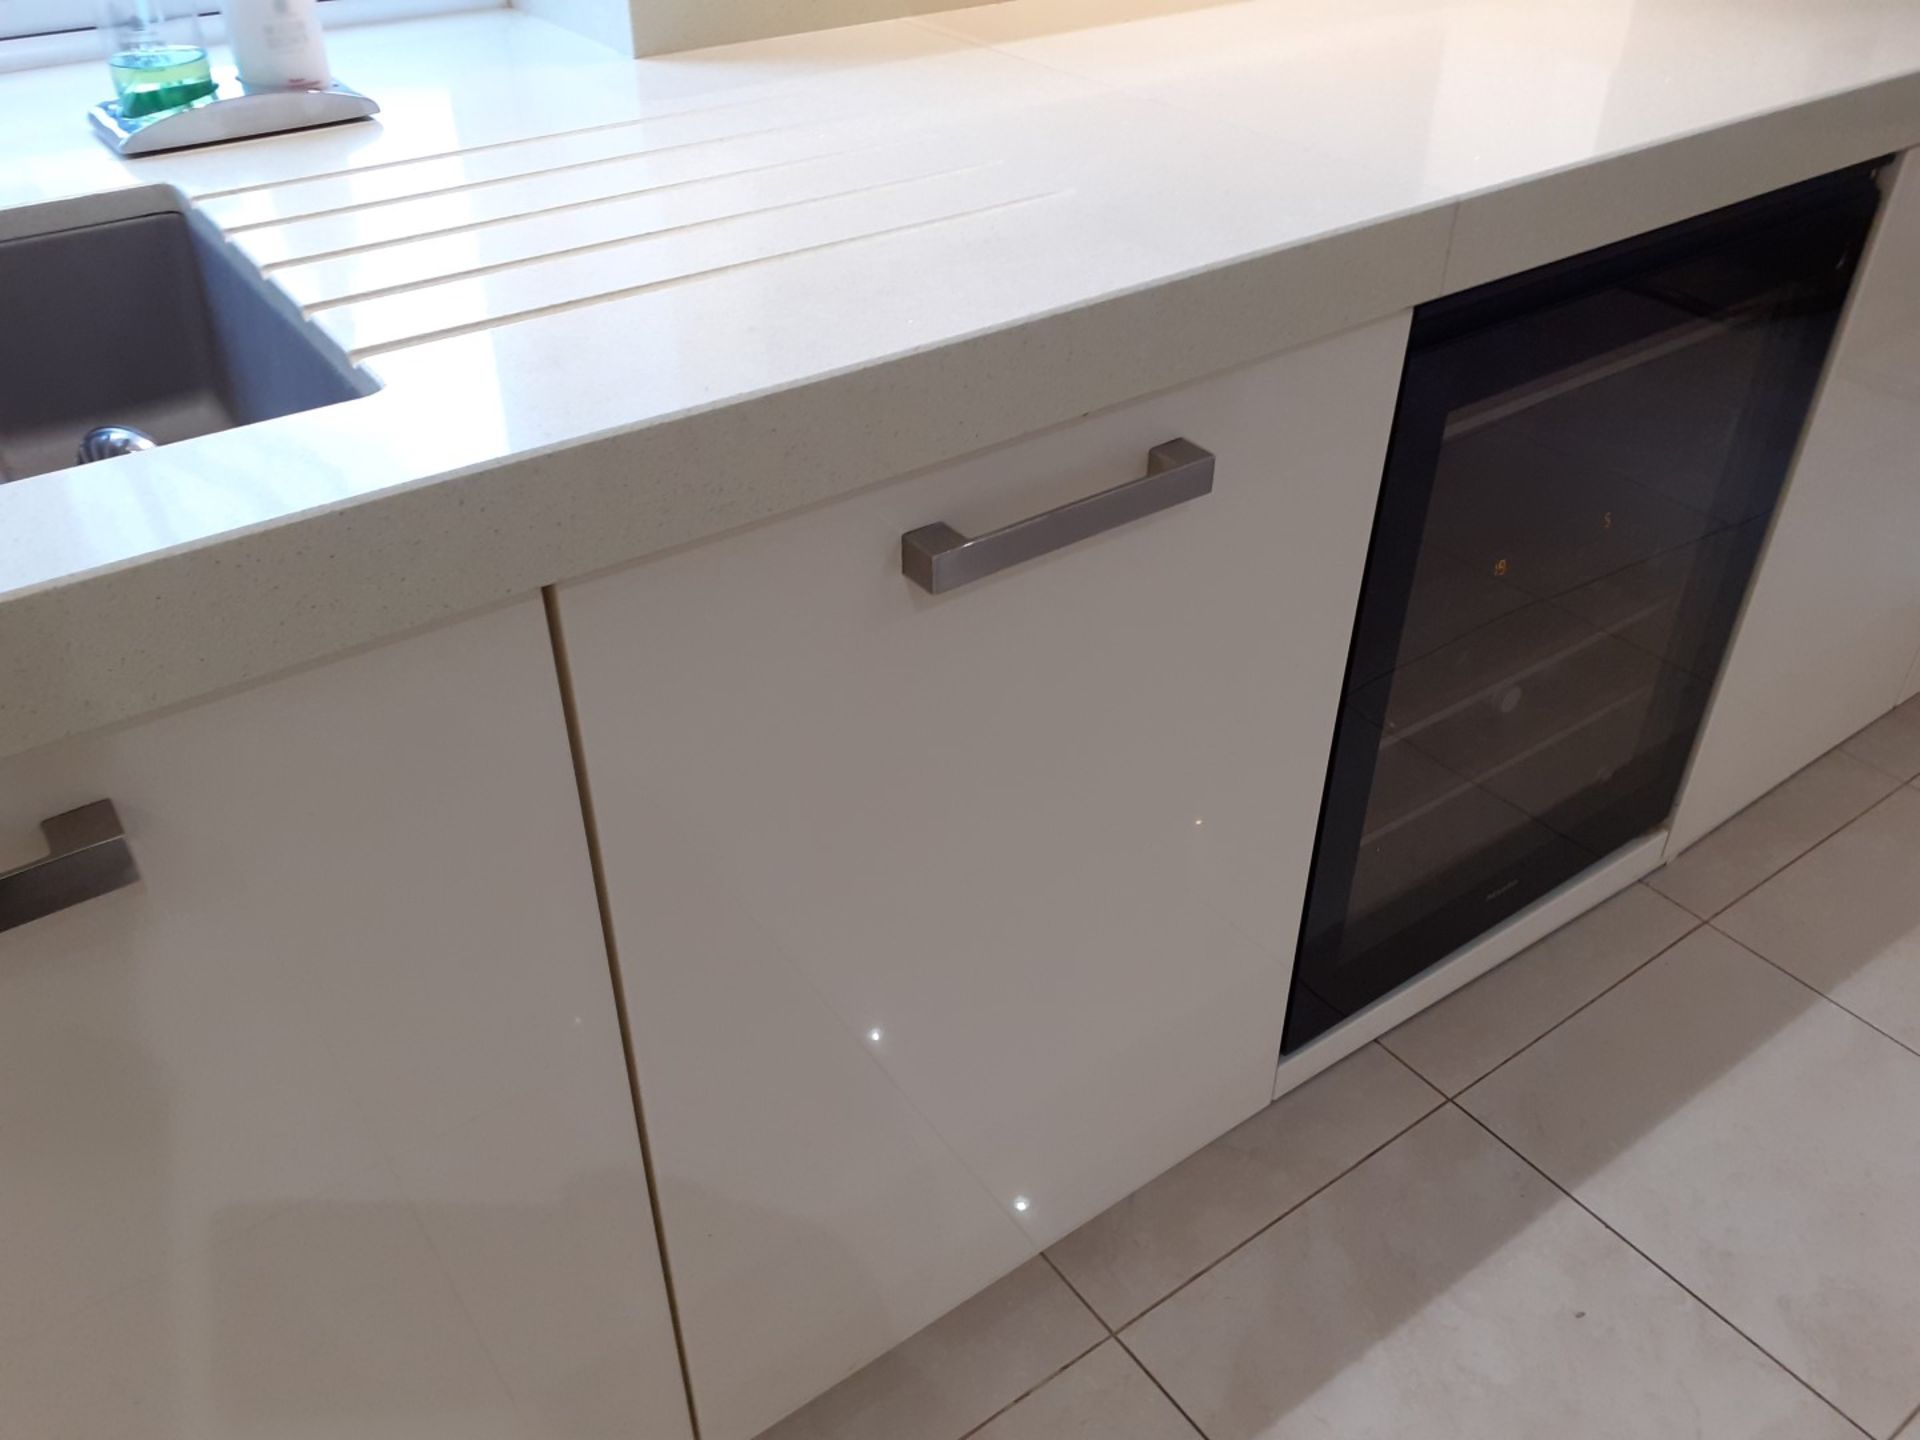 1 x ALNO Fitted Gloss White Kitchen With Integrated Miele Appliances, Silestone Worktops And A - Image 46 of 86